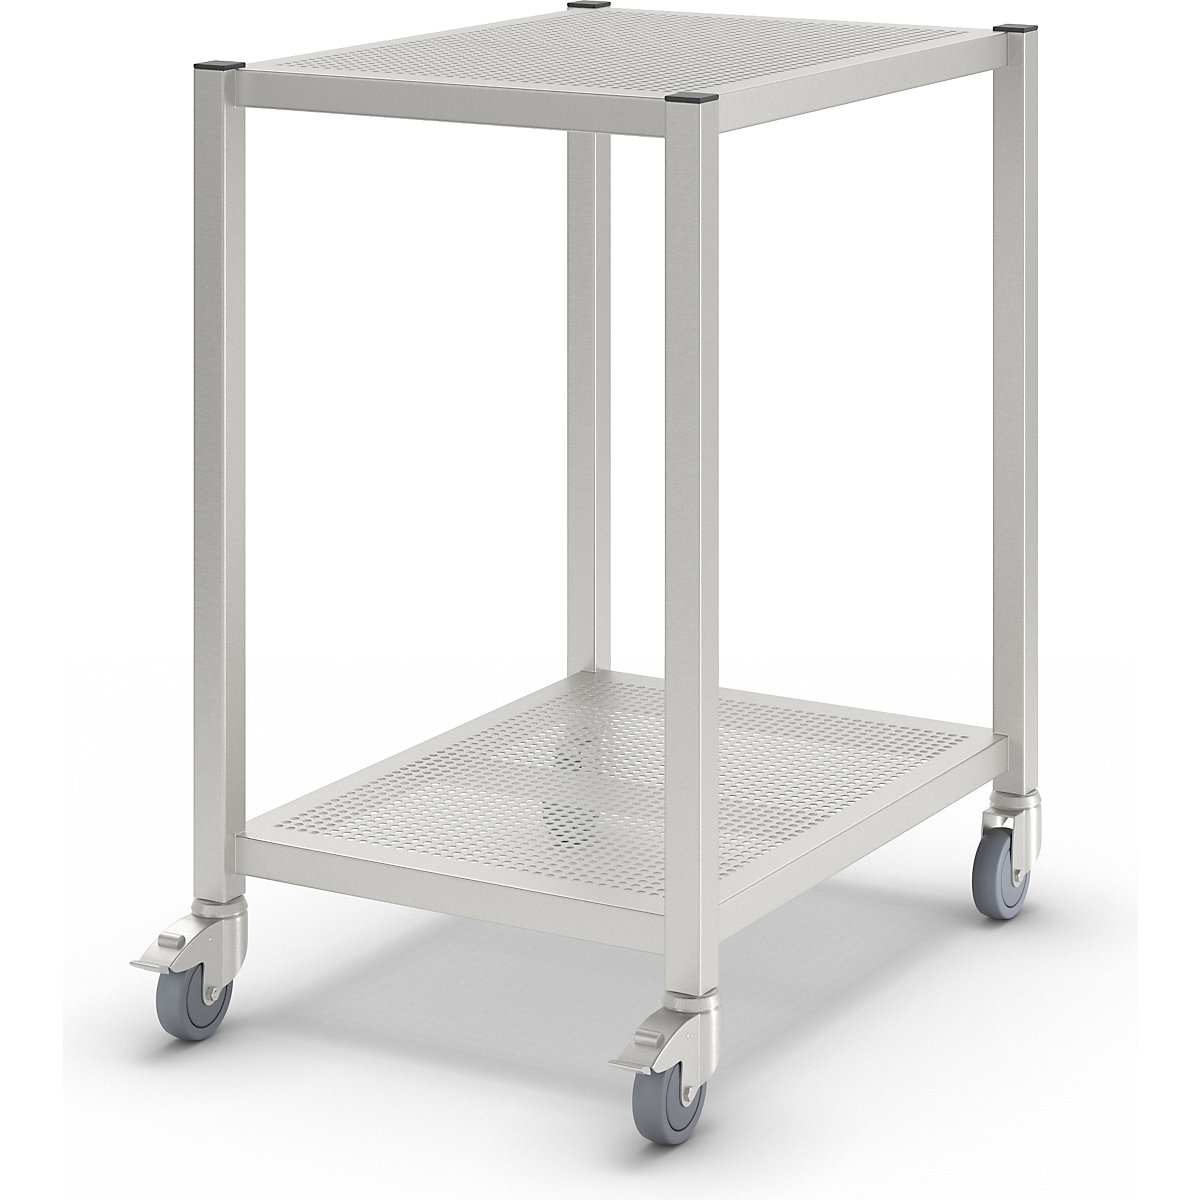 Mobile cleanroom table, made of stainless steel, 2 shelves, length 800 mm-3